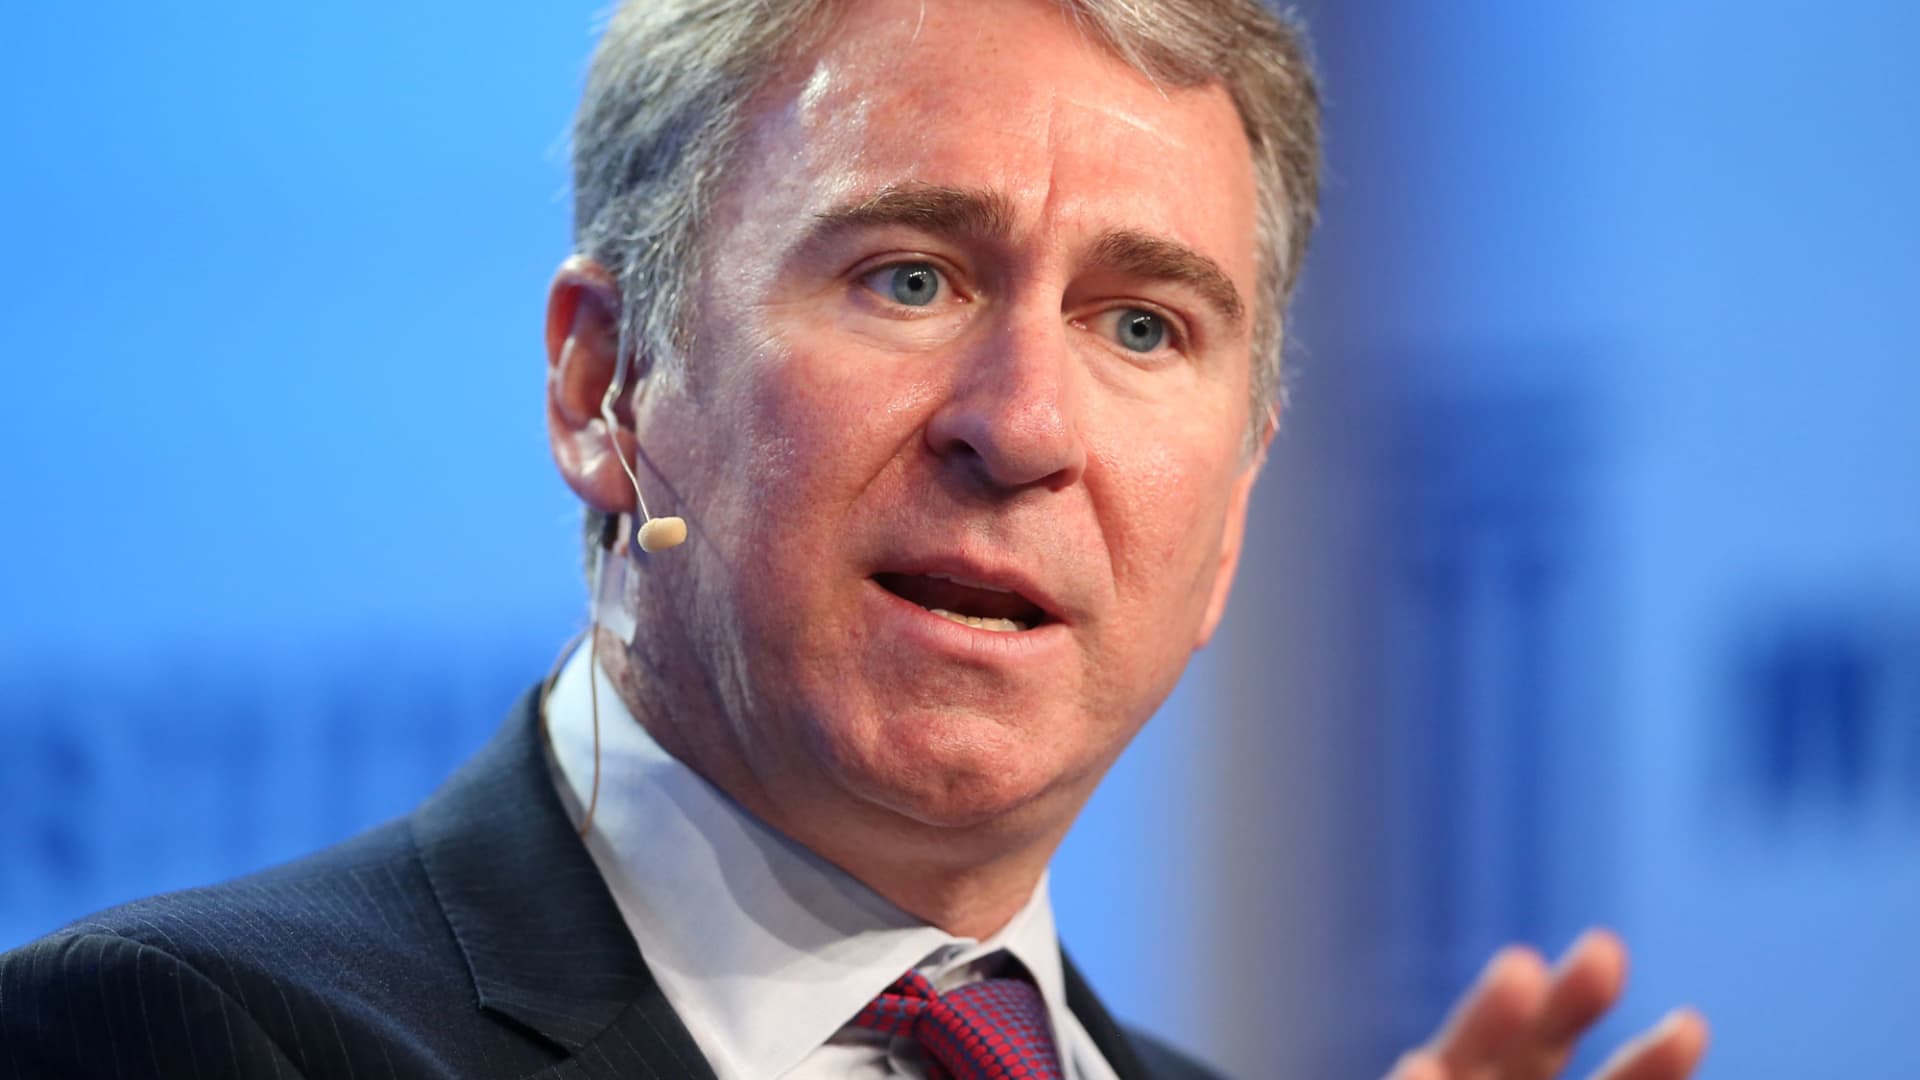 Ken Griffin says Fed has not done enough, must continue on its path to reset inflation expectations